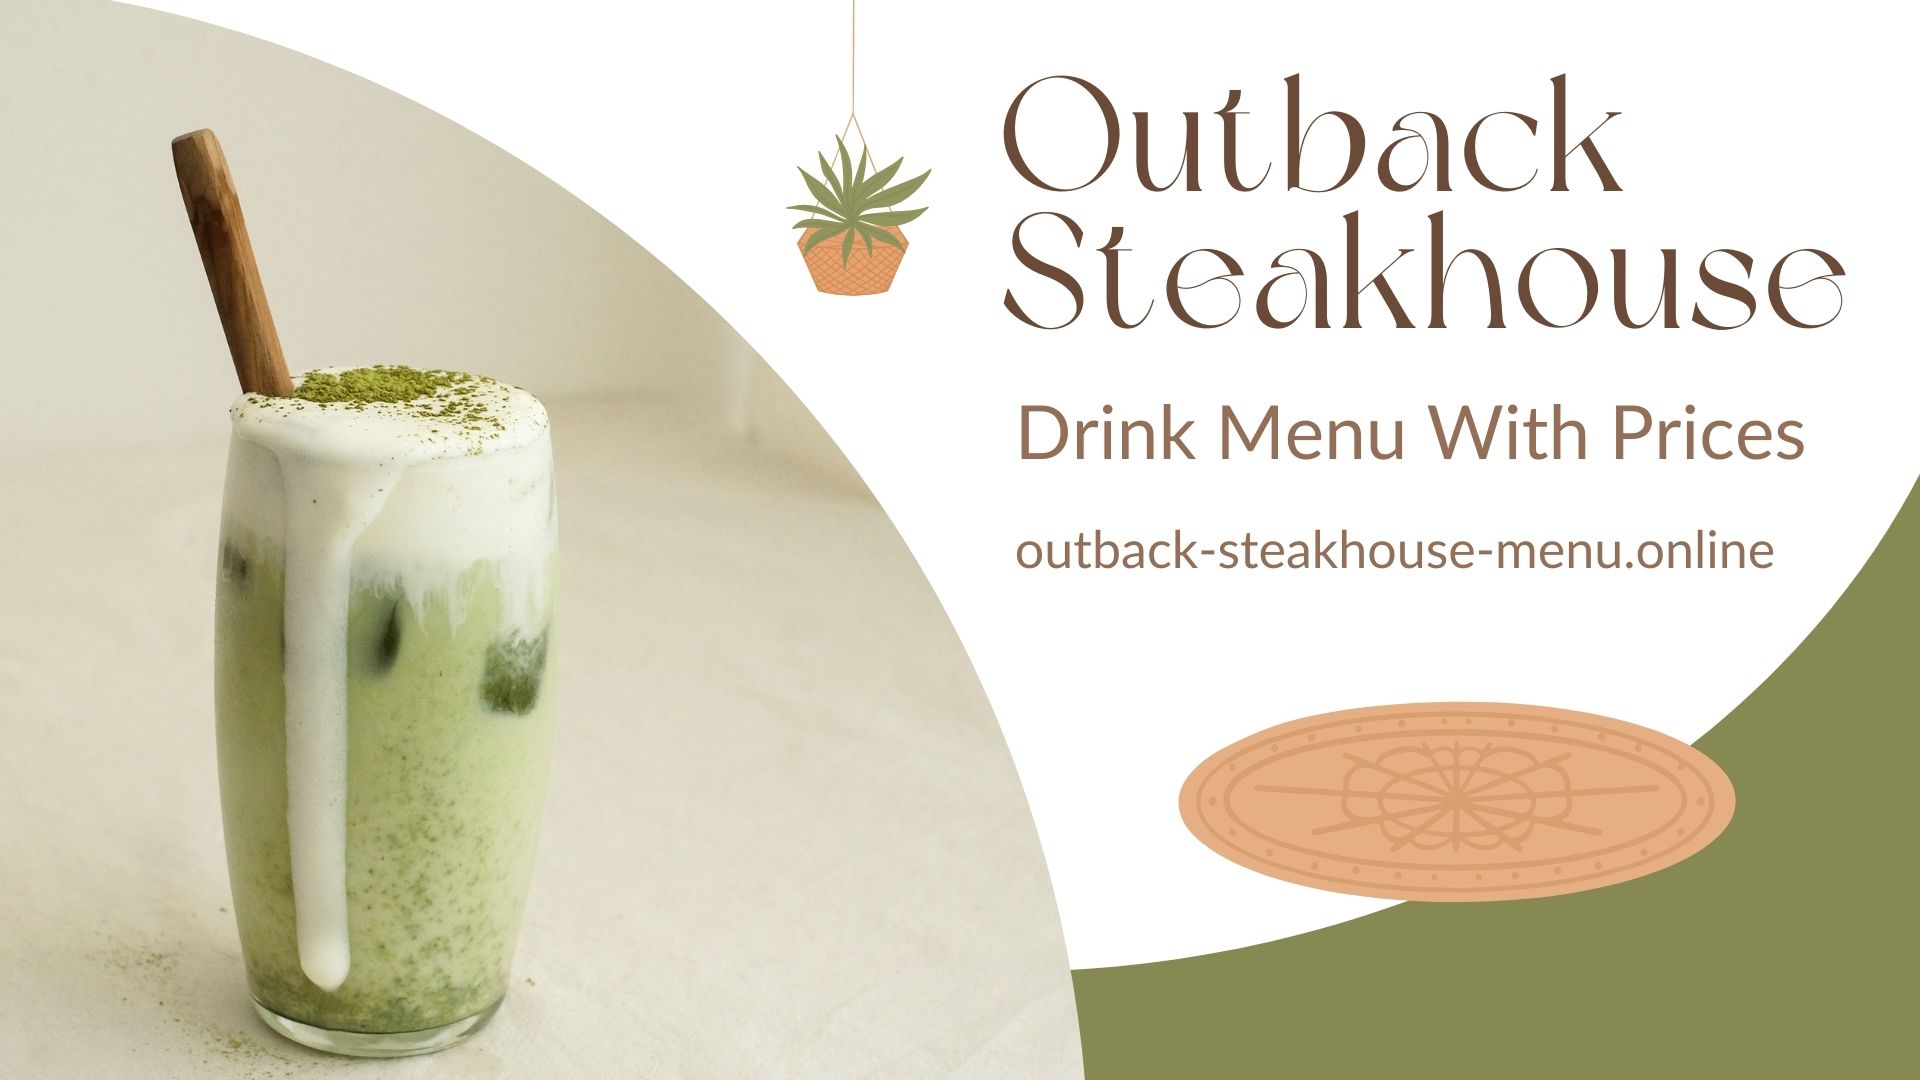 Outback Steakhouse Drink Menu With Prices